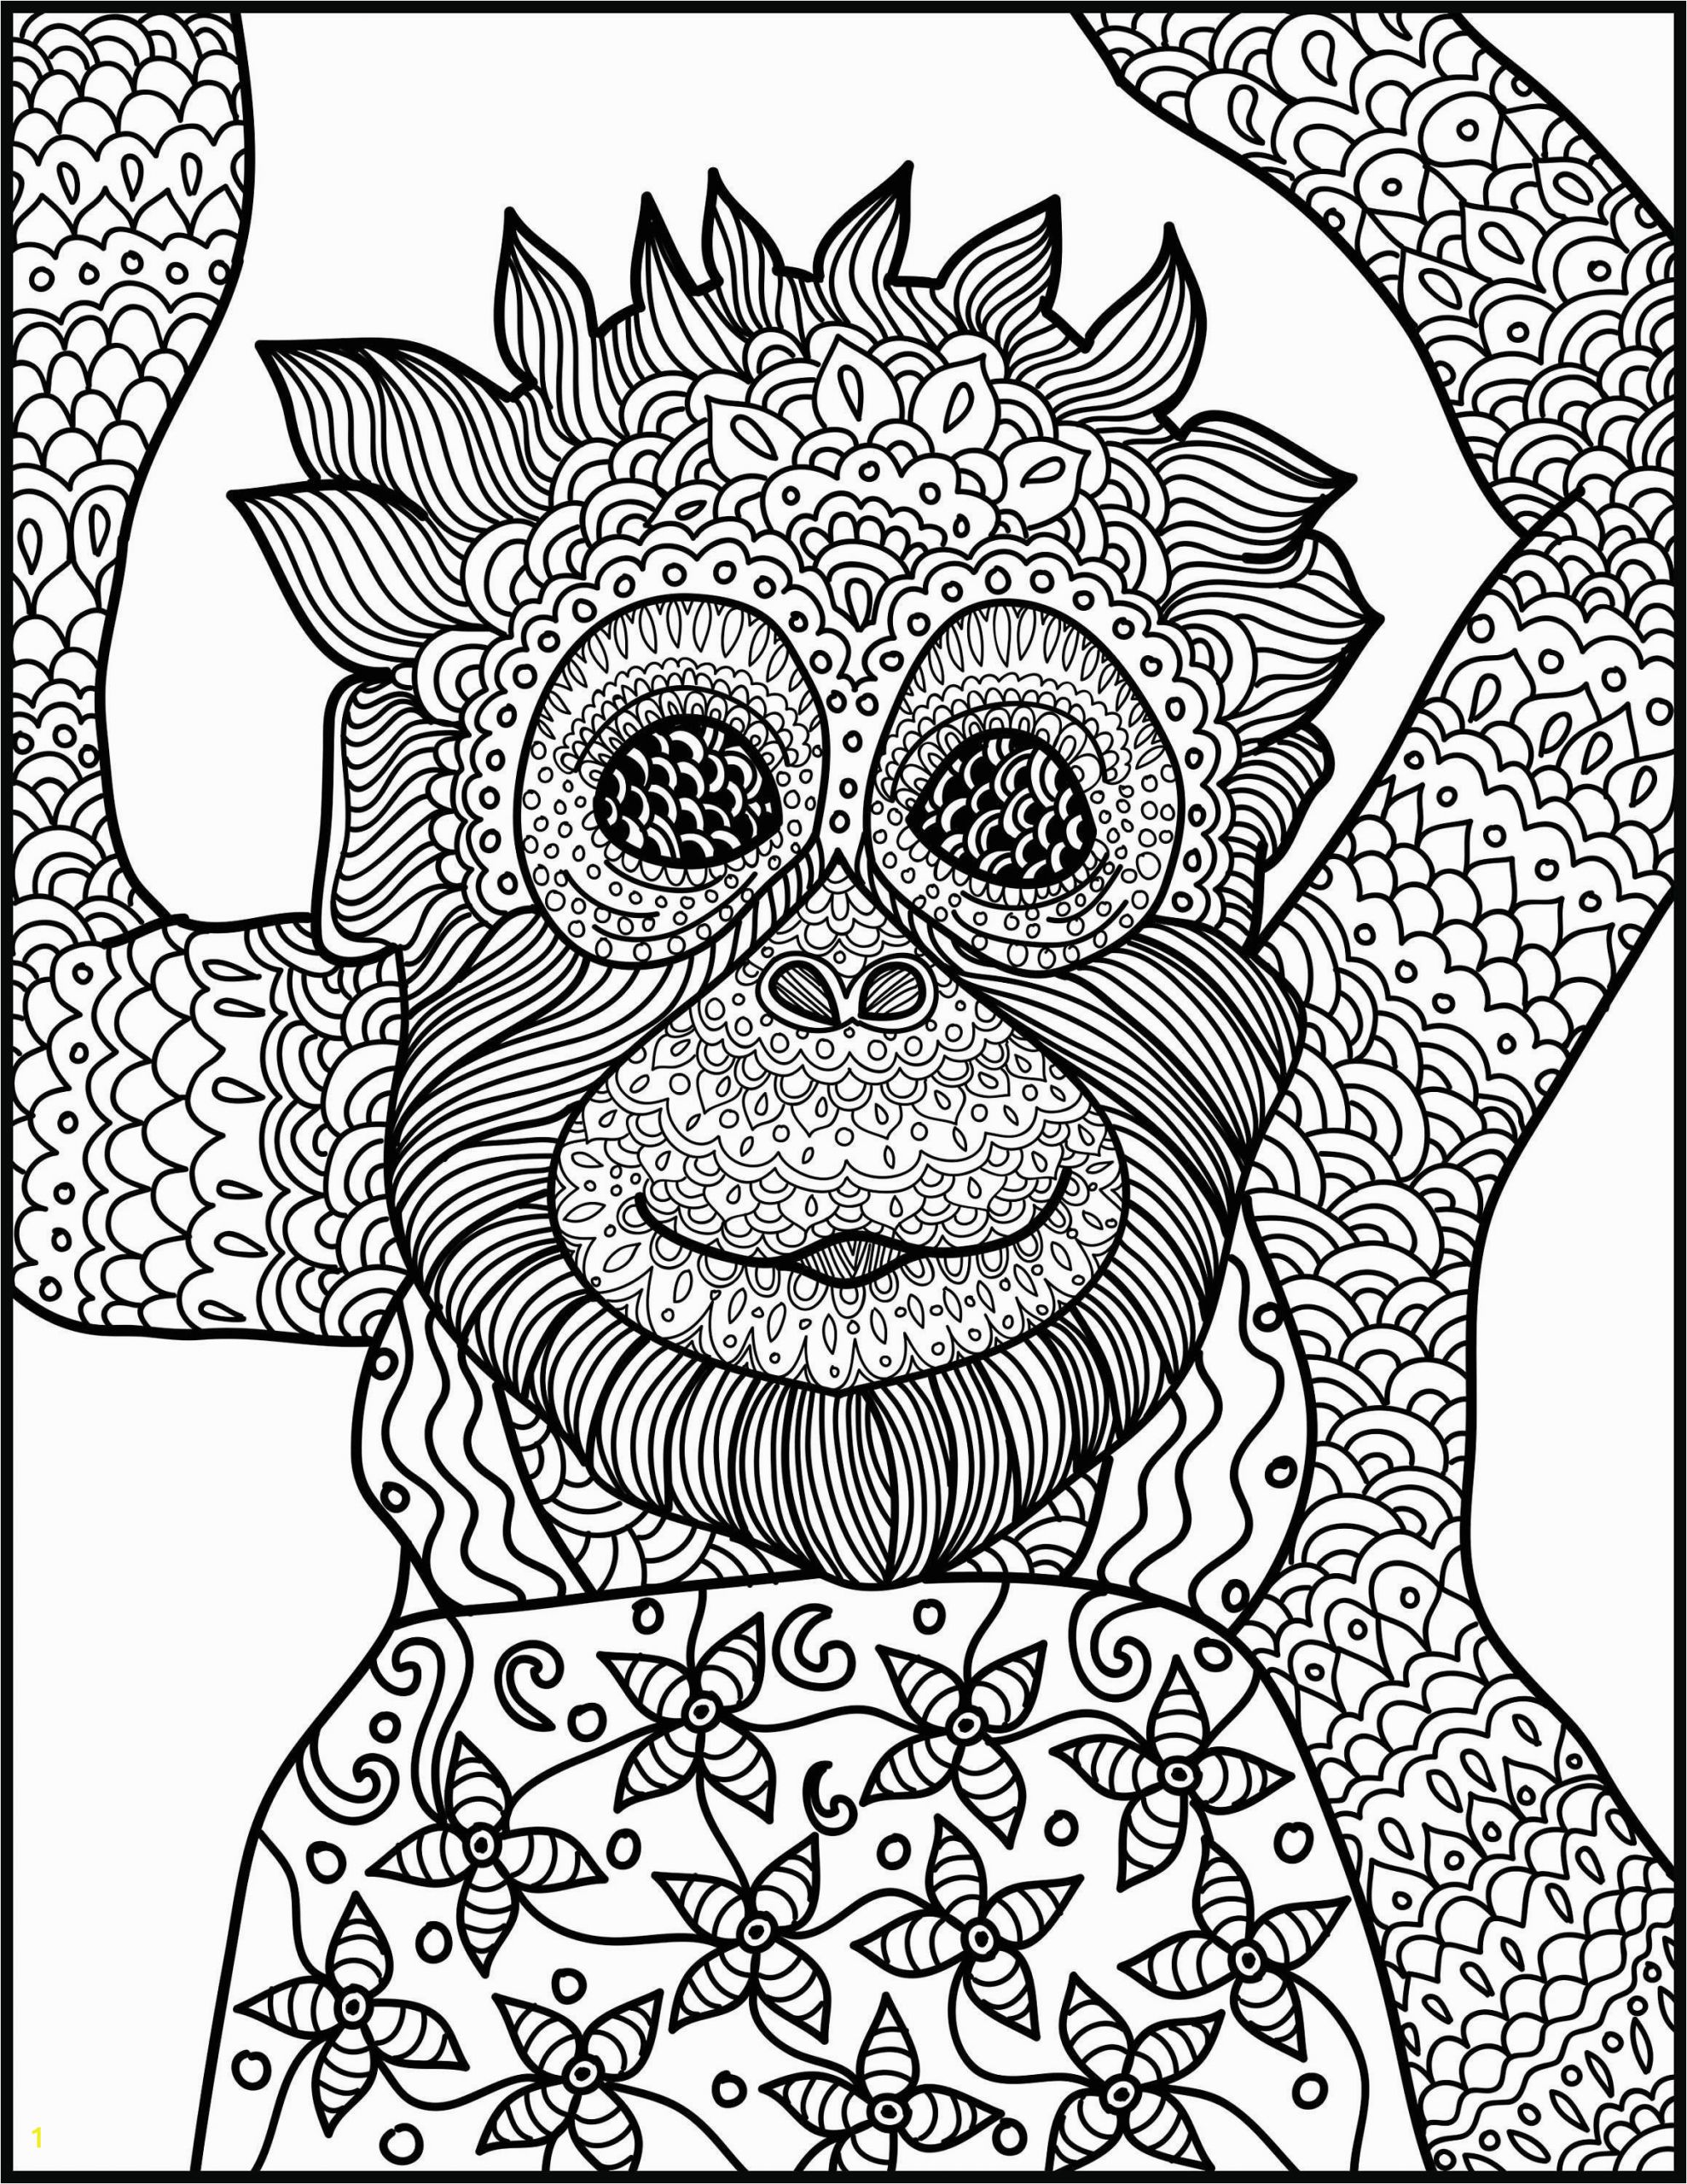 Print Off Coloring Pages for Adults Animal Coloring Page Monkey Printable Adult Coloring Page